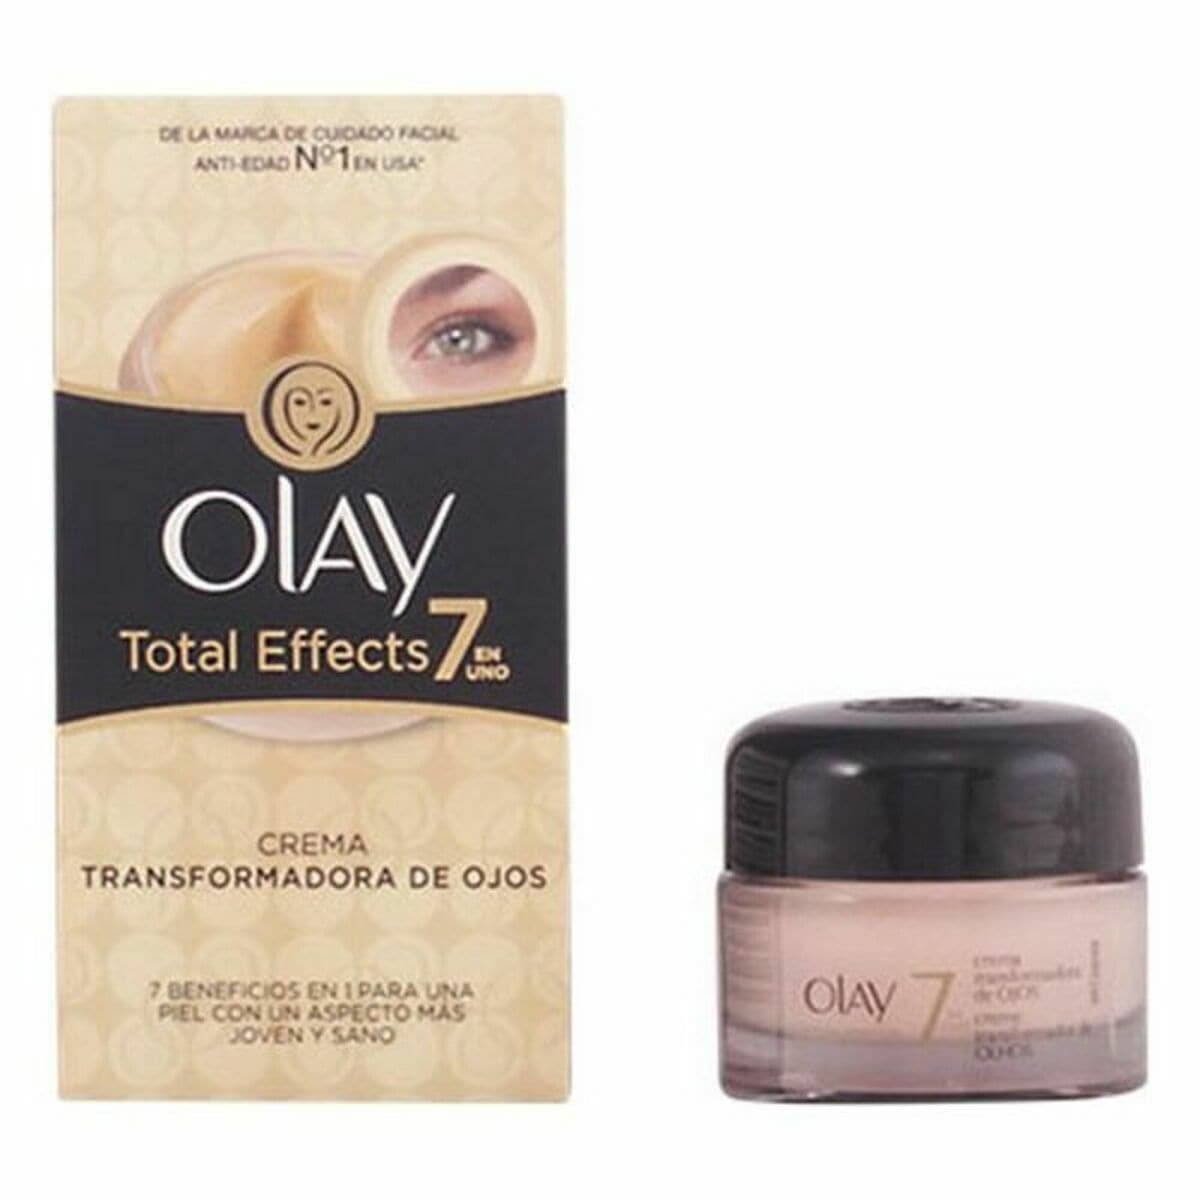 Anti-Ageing Cream for Eye Area Total Effects Olay Total Effects (15 ml) 15 ml-0